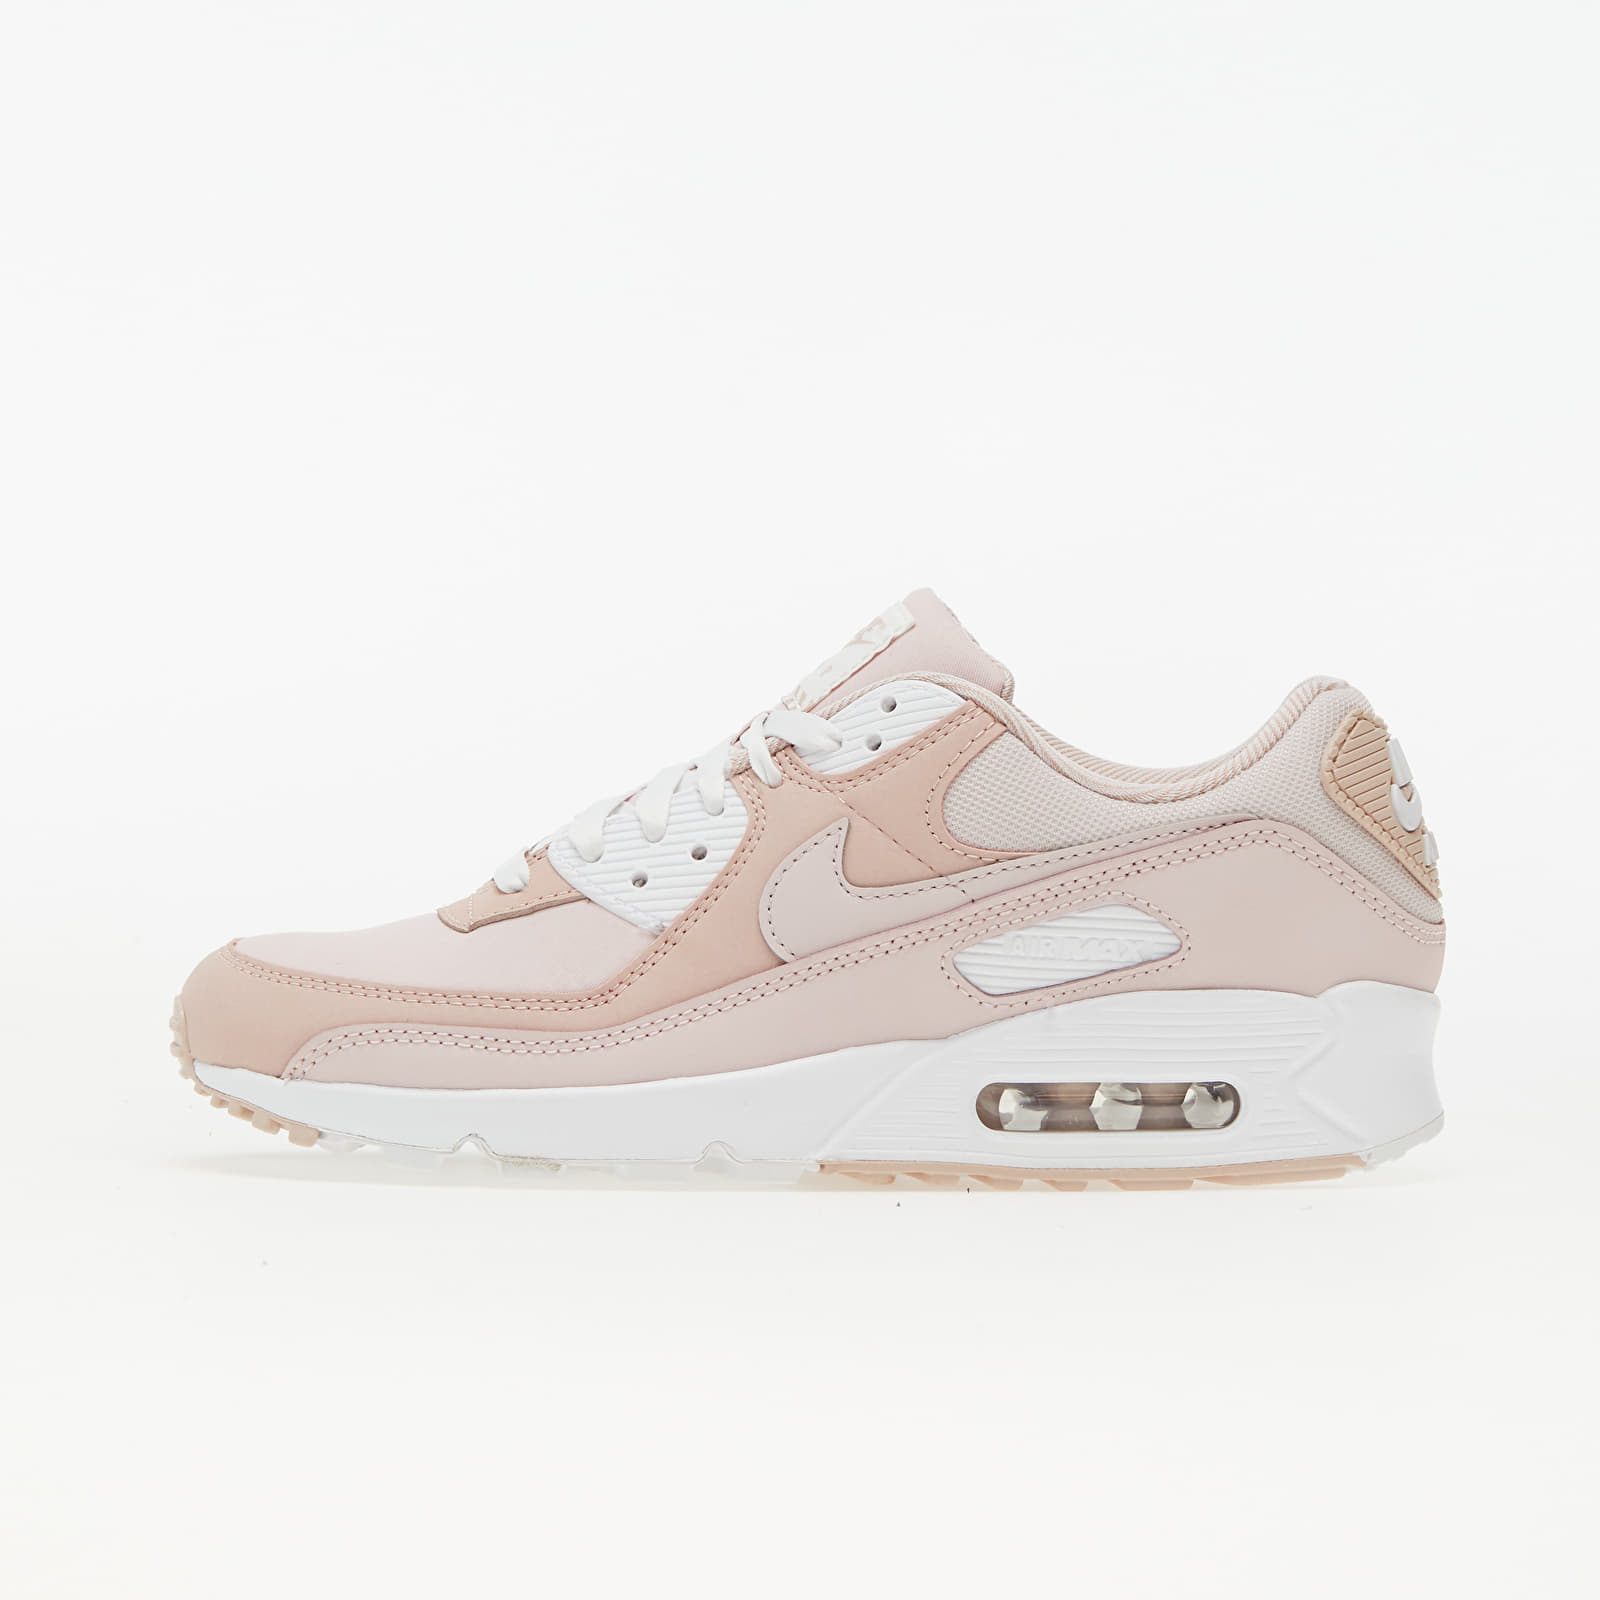 Дамски кецове и обувки Nike W Air Max 90 Barely Rose/ Barely Rose-Pink Oxford 720469